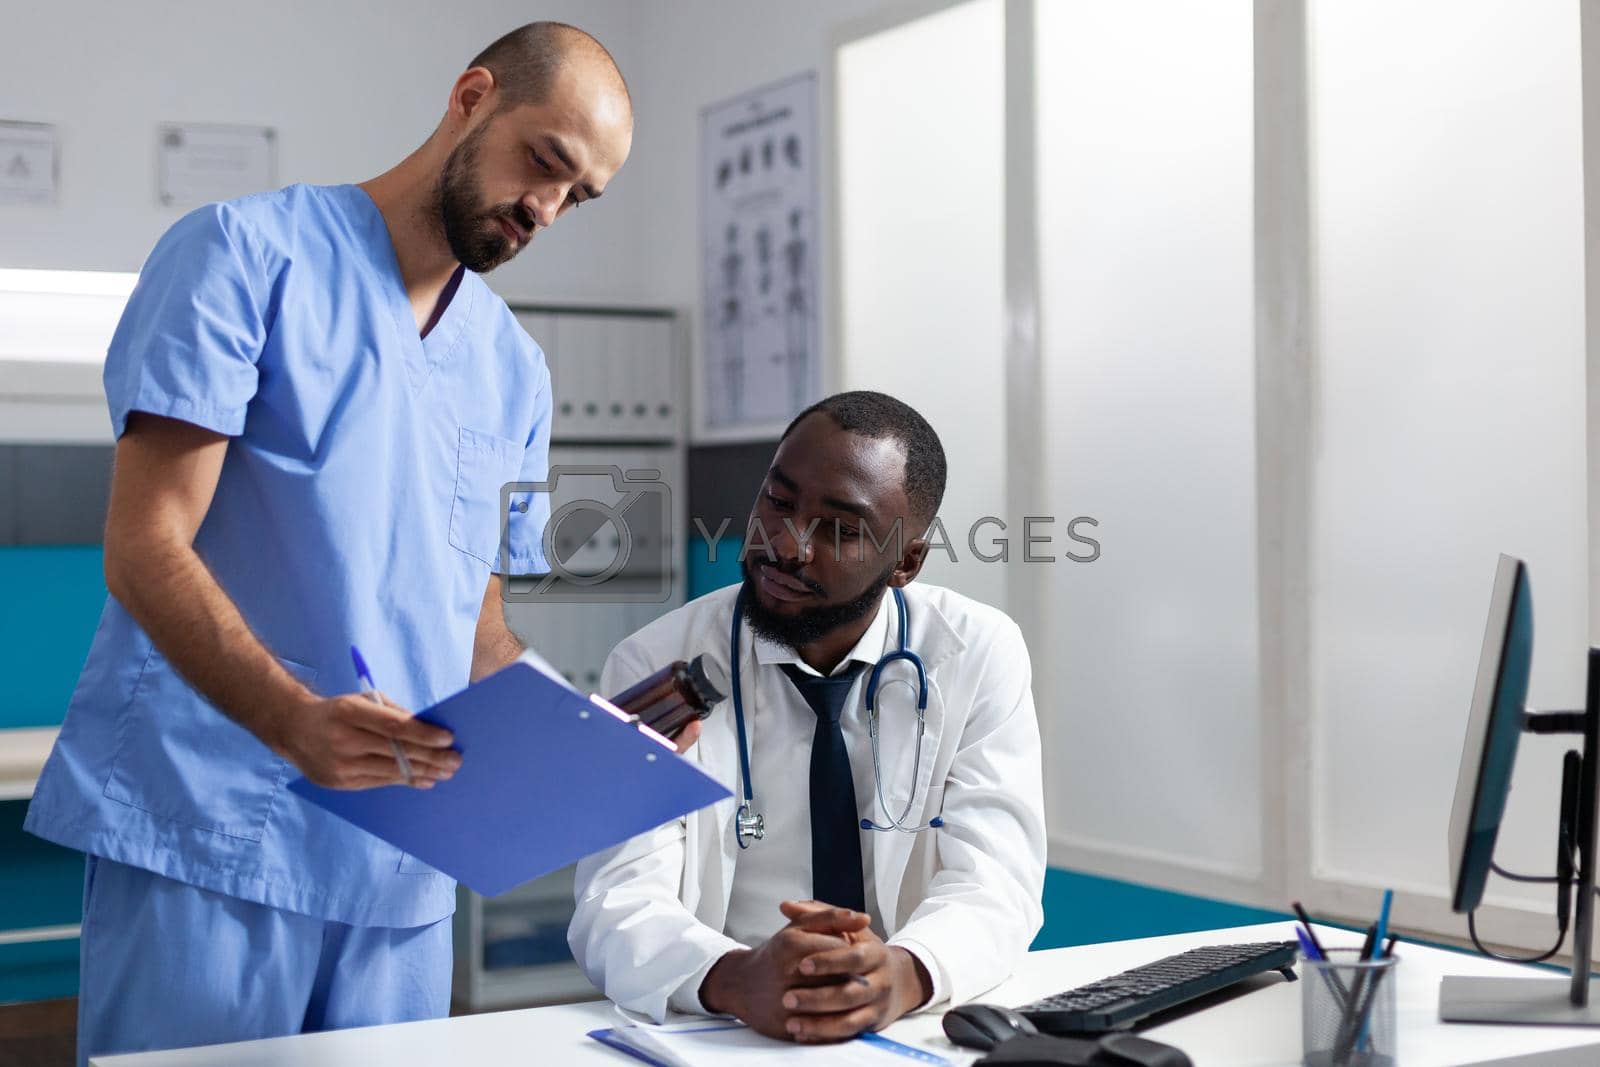 Medical team of practitioners analyzing disease symptoms discussing healthcare treatment working in hospital office. Doctor checking medicine prescription during clinical appointment